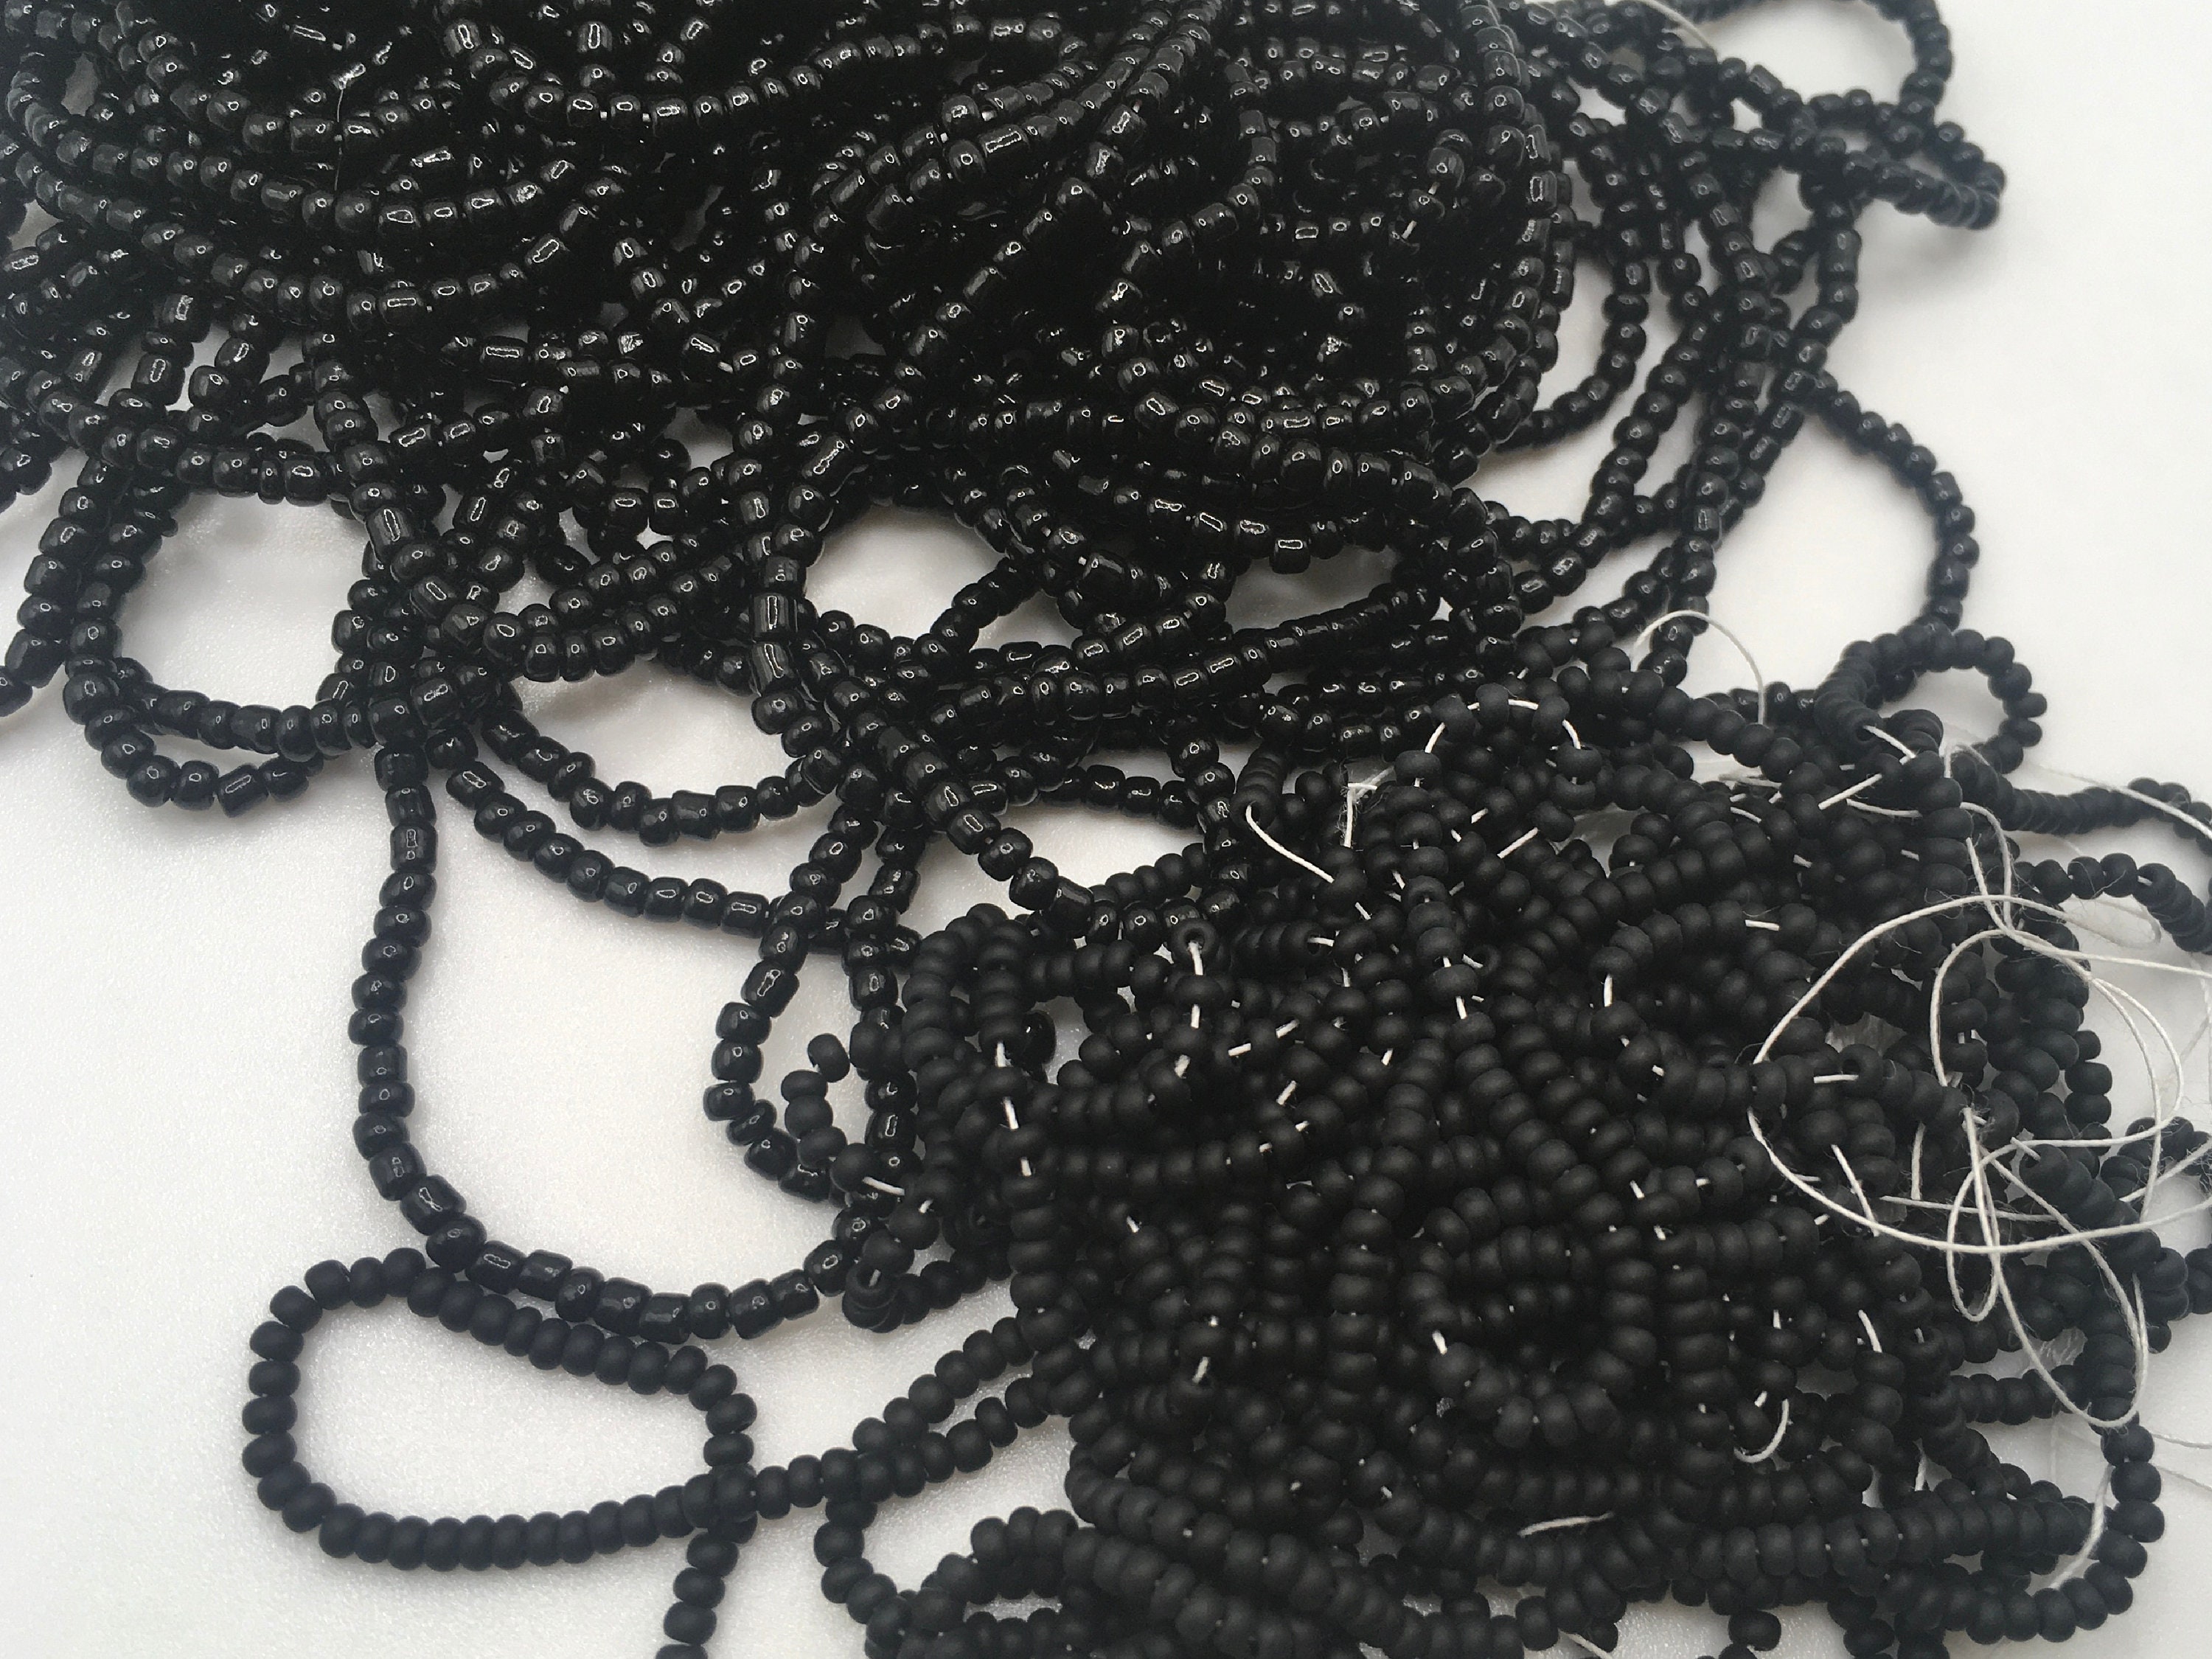 Super Tiny Black Seed Bead Necklace / Choker, Tiny Black Opaque Seed Bead  Shiny or MATTE, Choose a Length, Minimalist, Formal Now also 8/0!